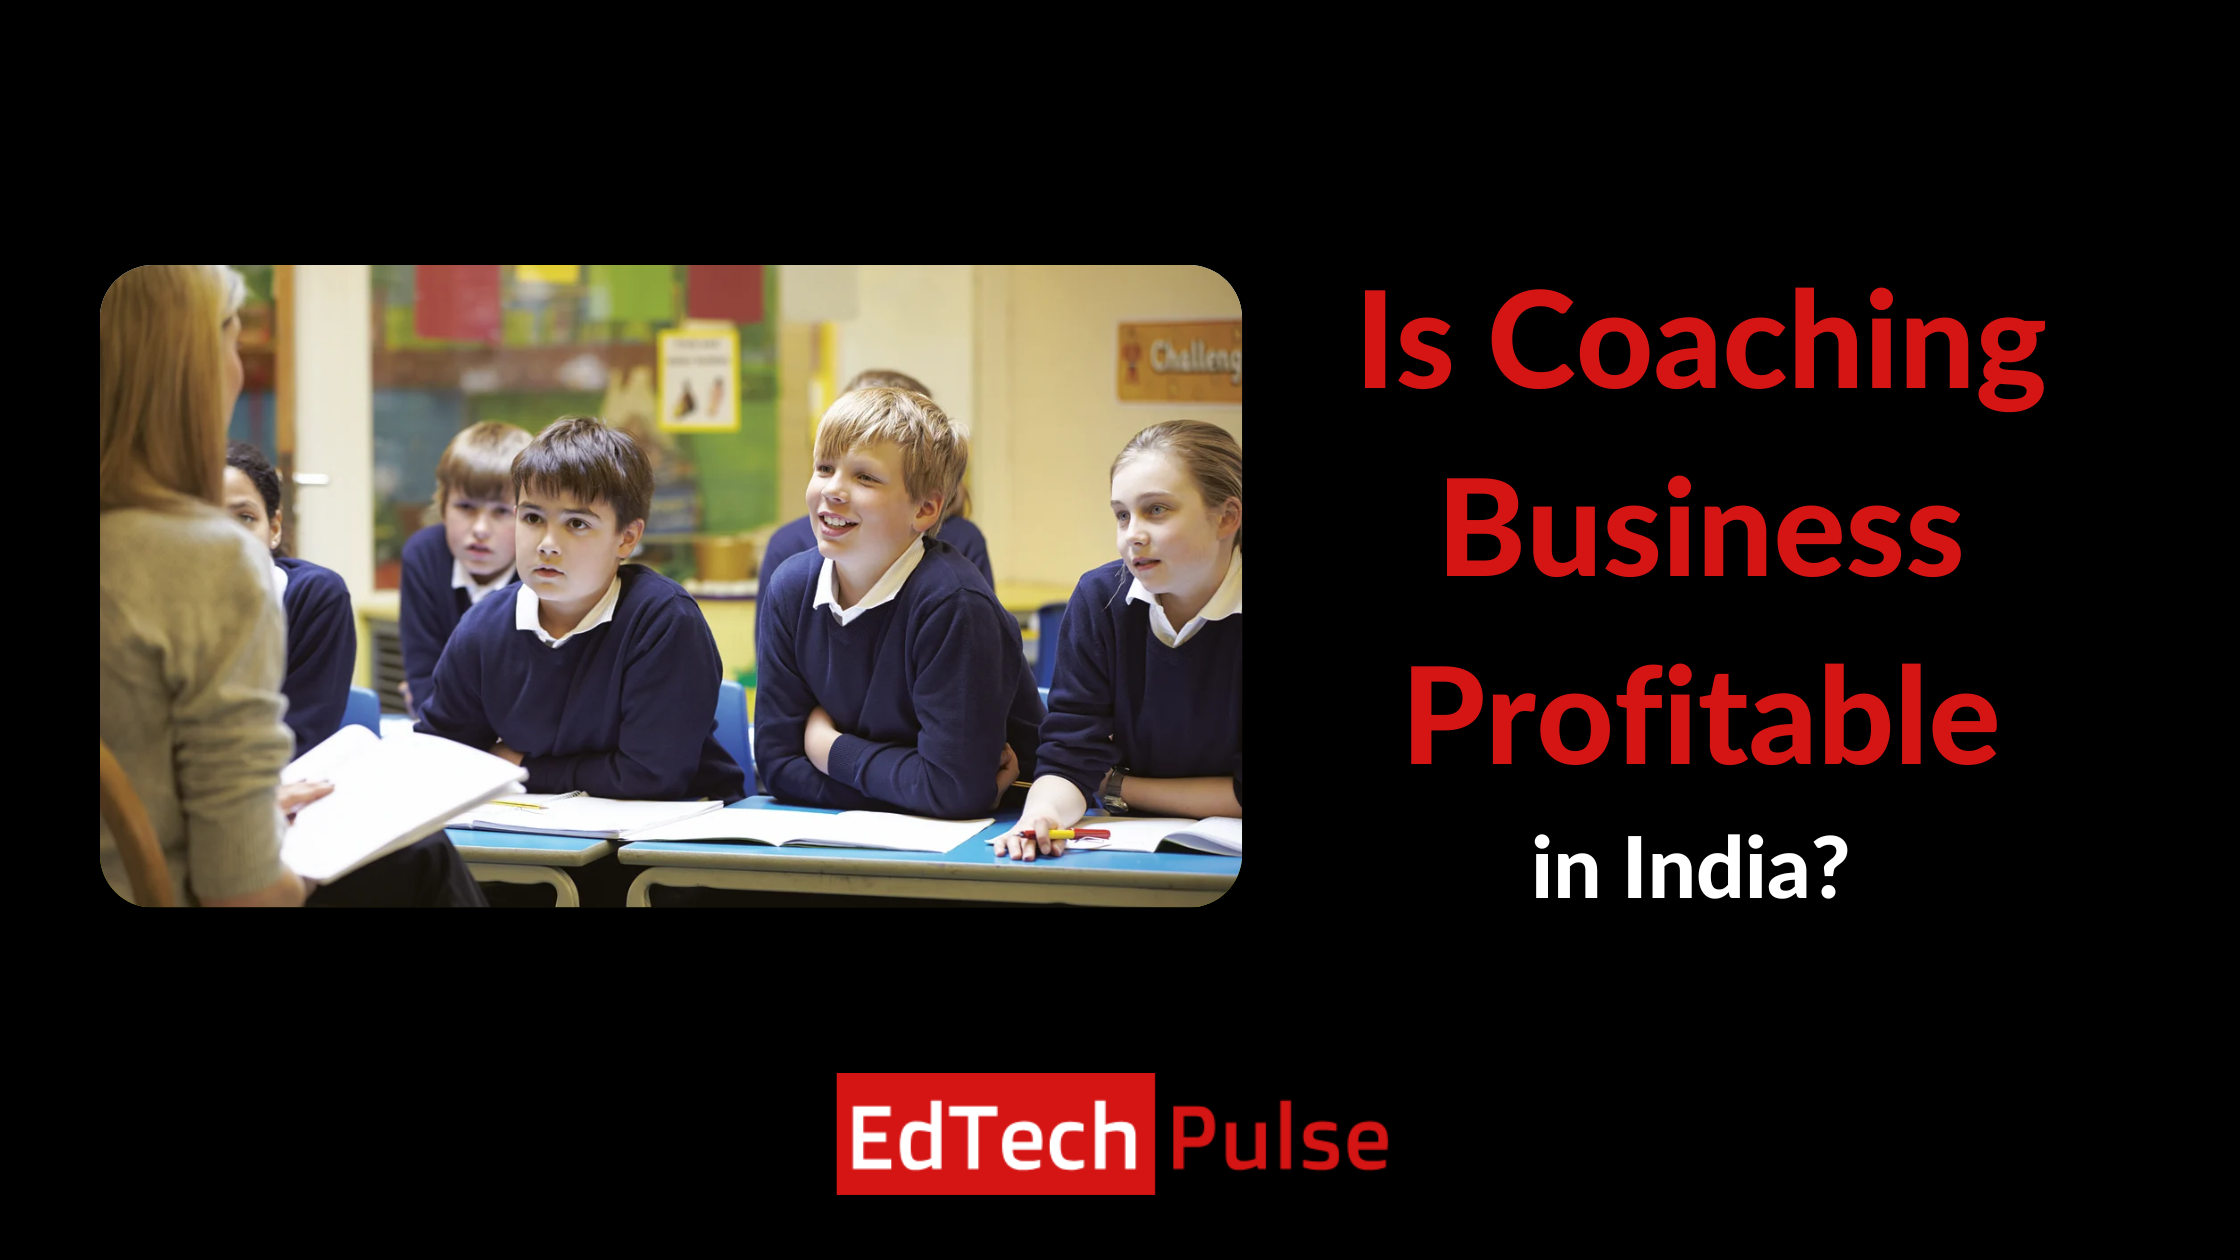 Is Coaching Business Profitable in India?